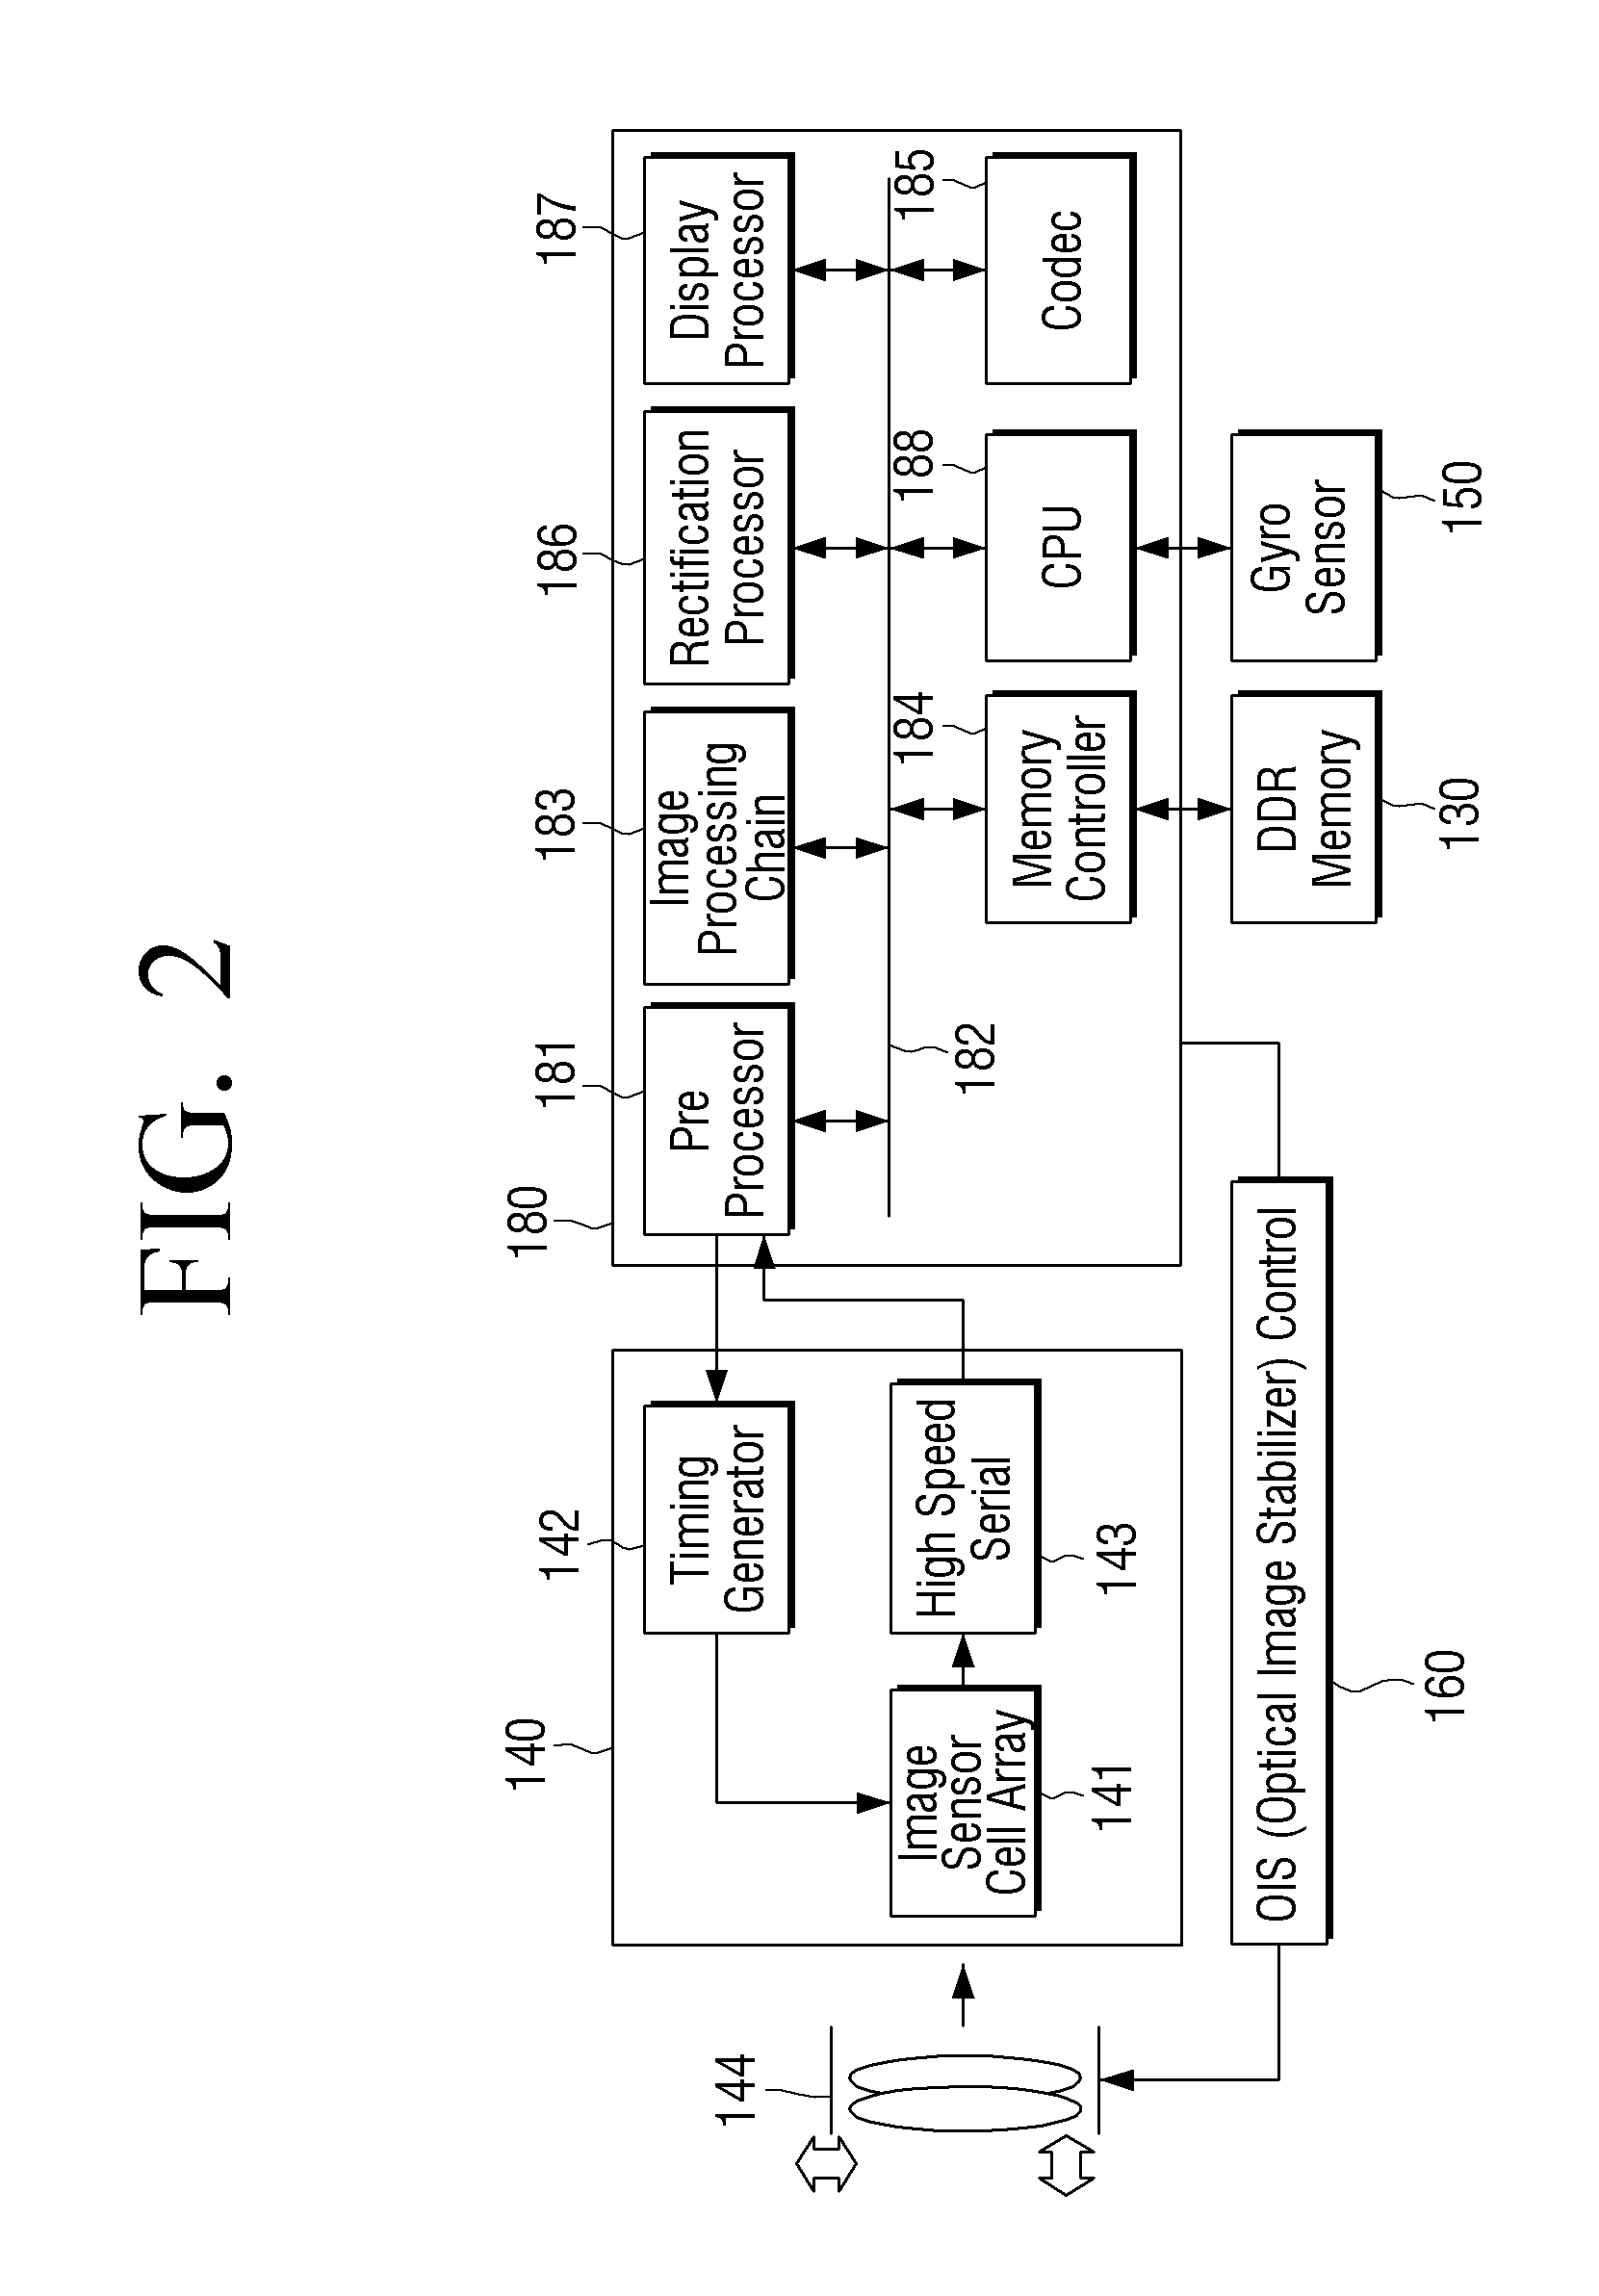 Image pickup apparatus, method of performing image compensation, and computer readable recording medium